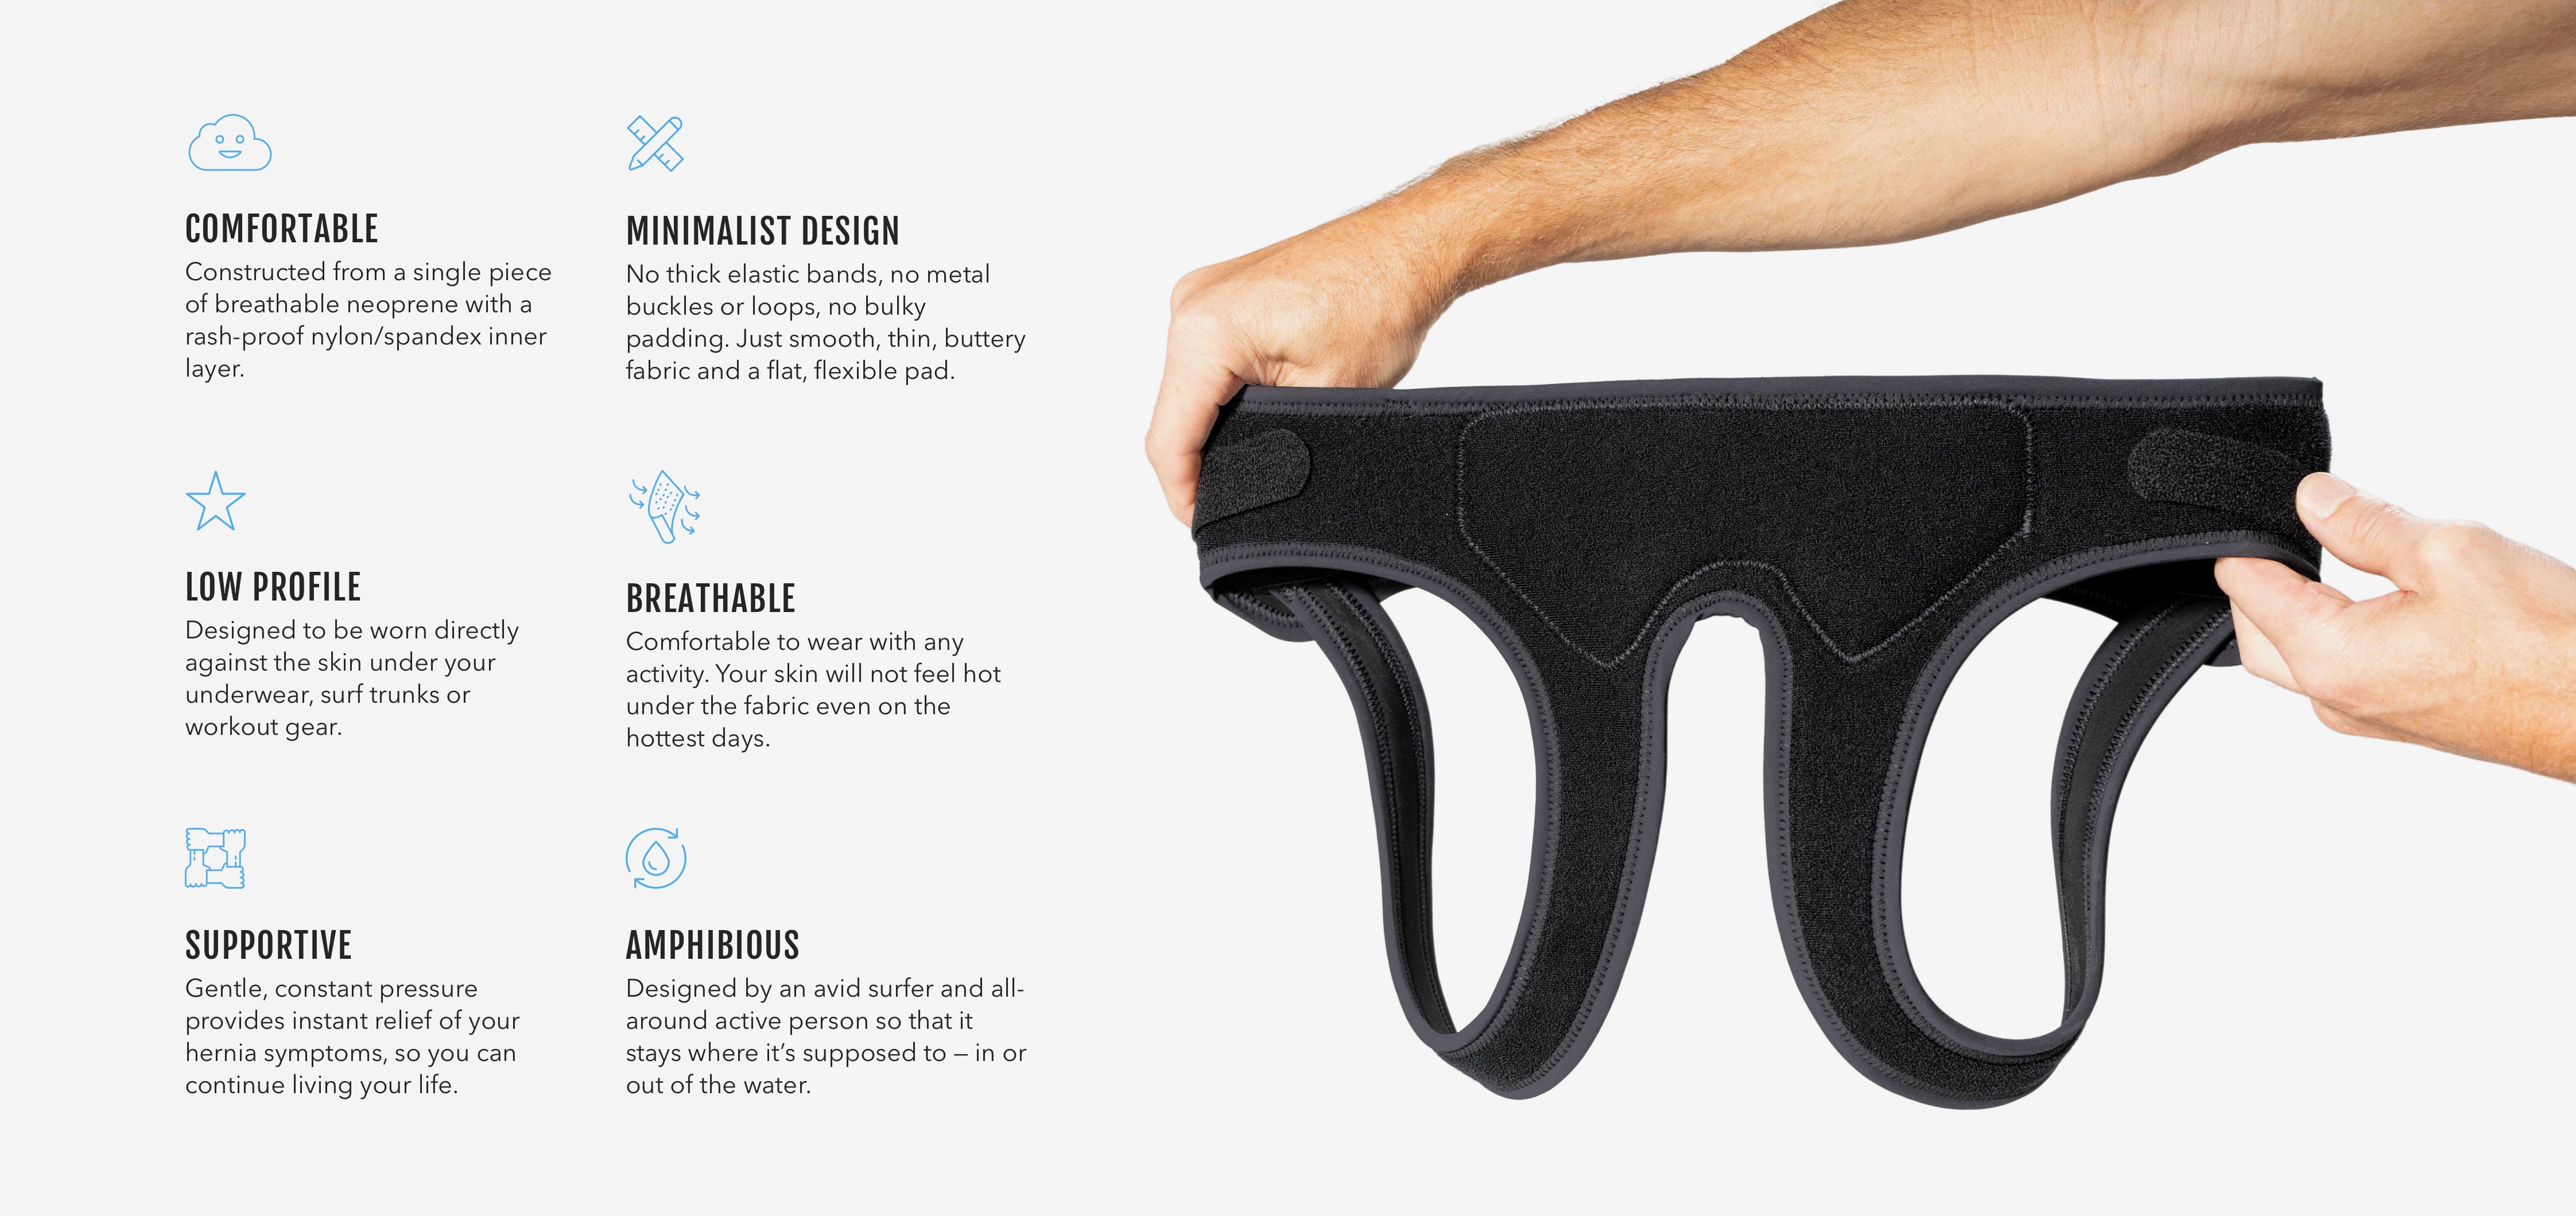 Minimalist double side hernia belt in hands next to text with key features